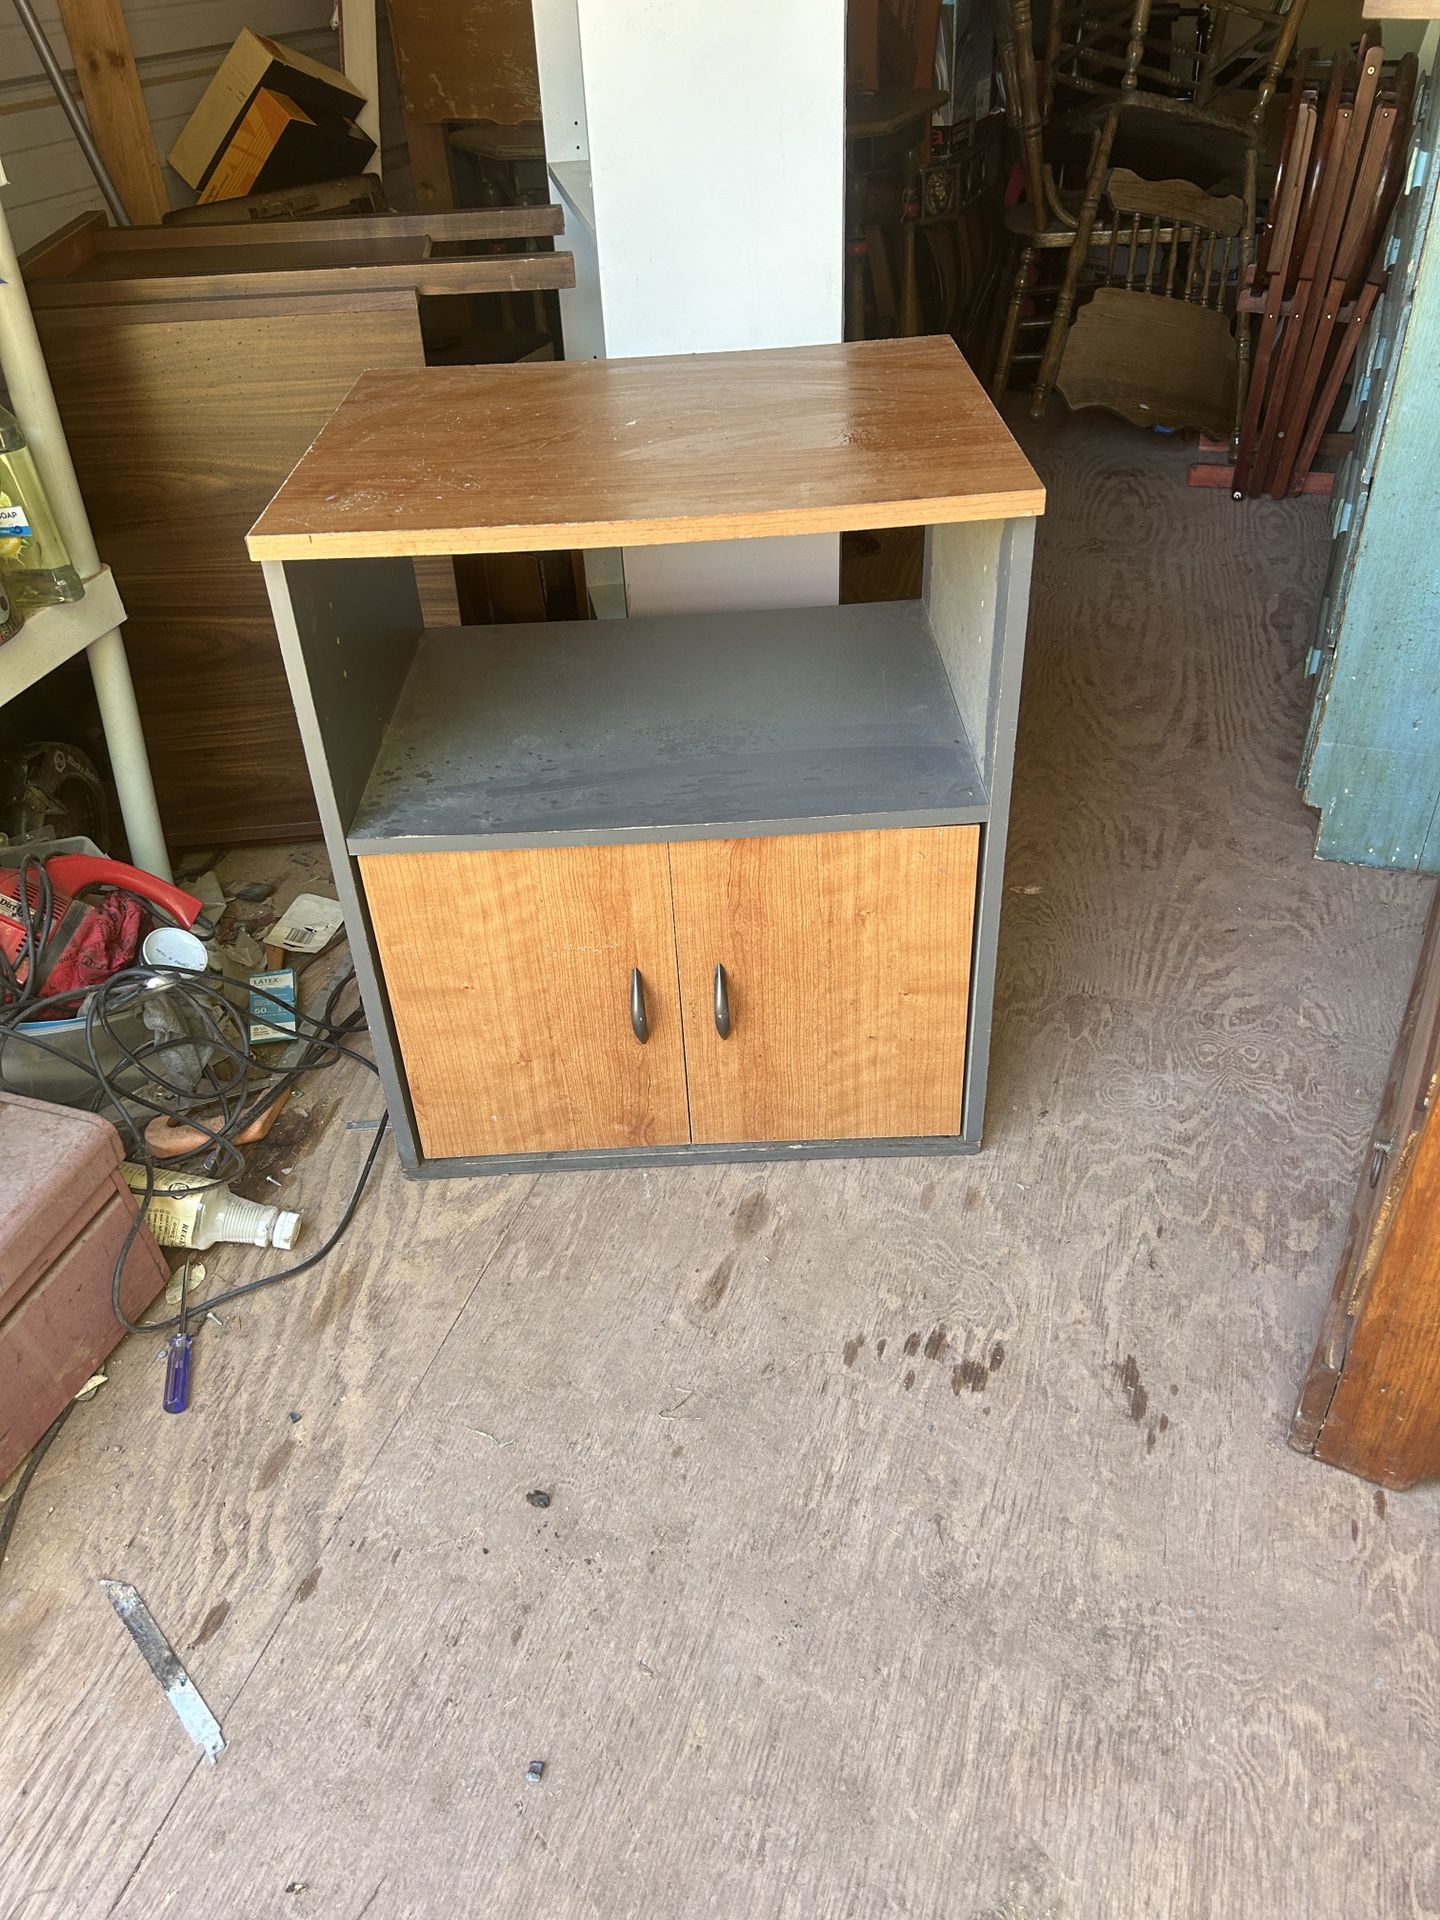 a cabinet its 27 inches tall 24 inches wide and 20 inches deep